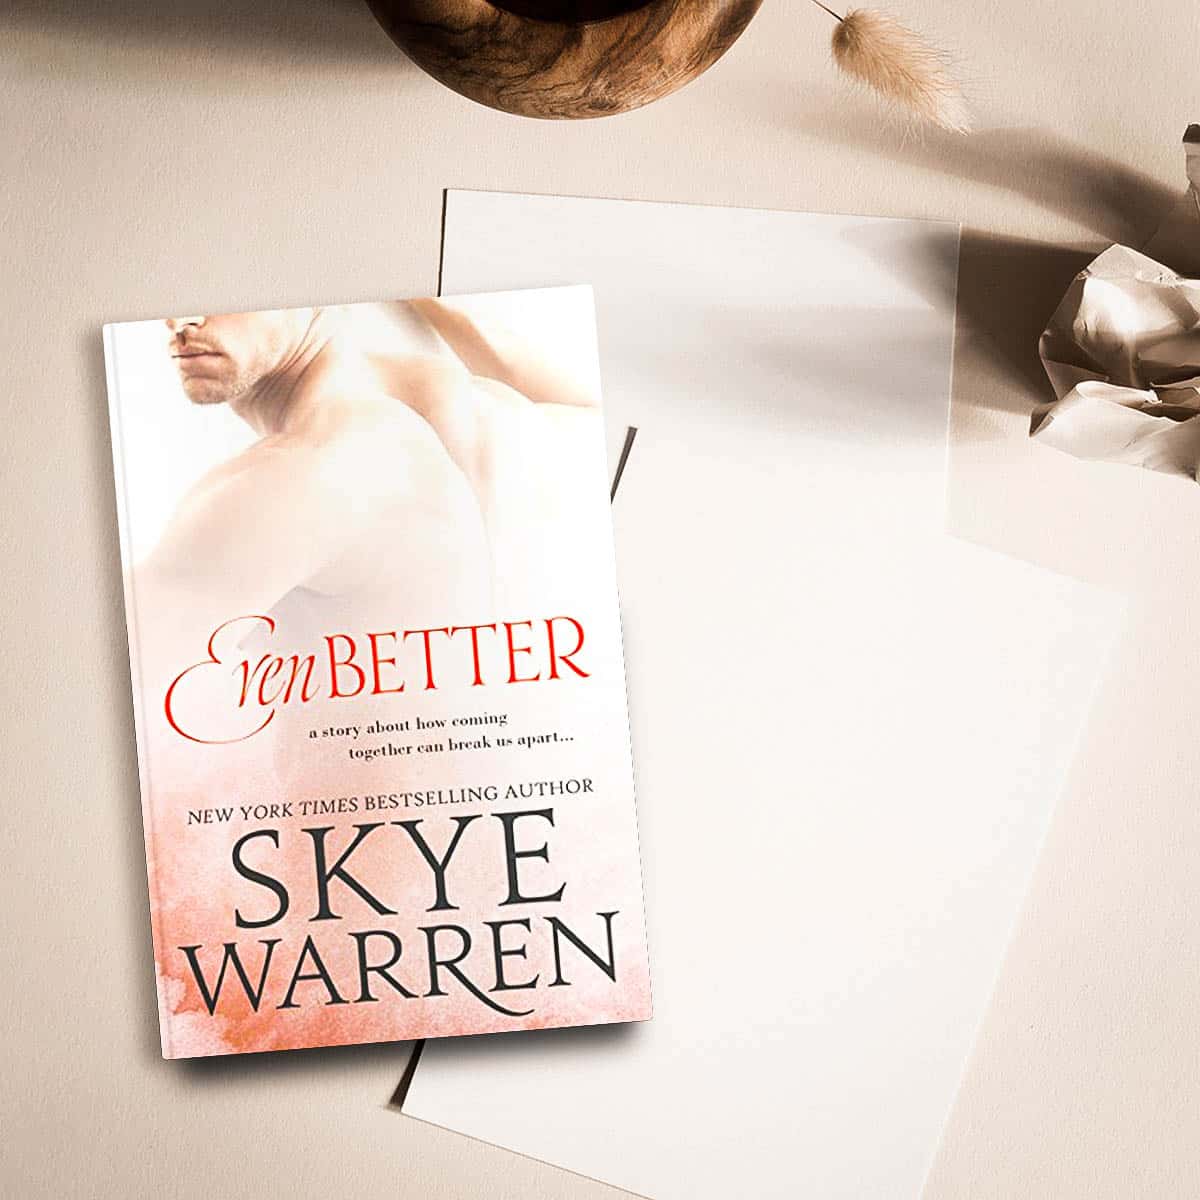 Even Better by Skye Warren is a novella between the second and third books of the Stripped series. Enjoy this excerpt and grab your copy today!